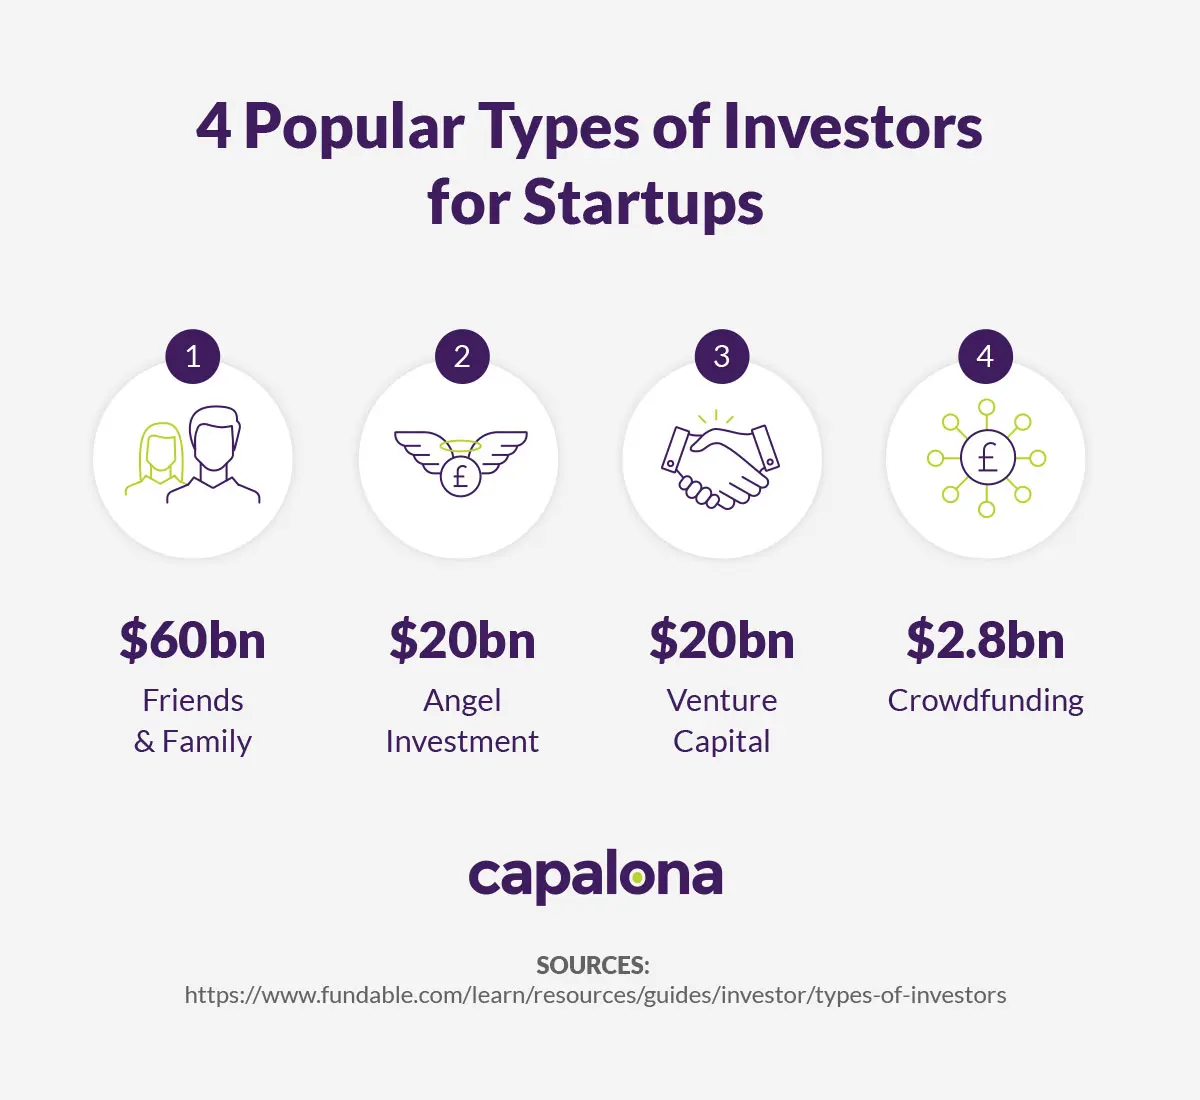 Friends and family are the most popular investors for startup businesses